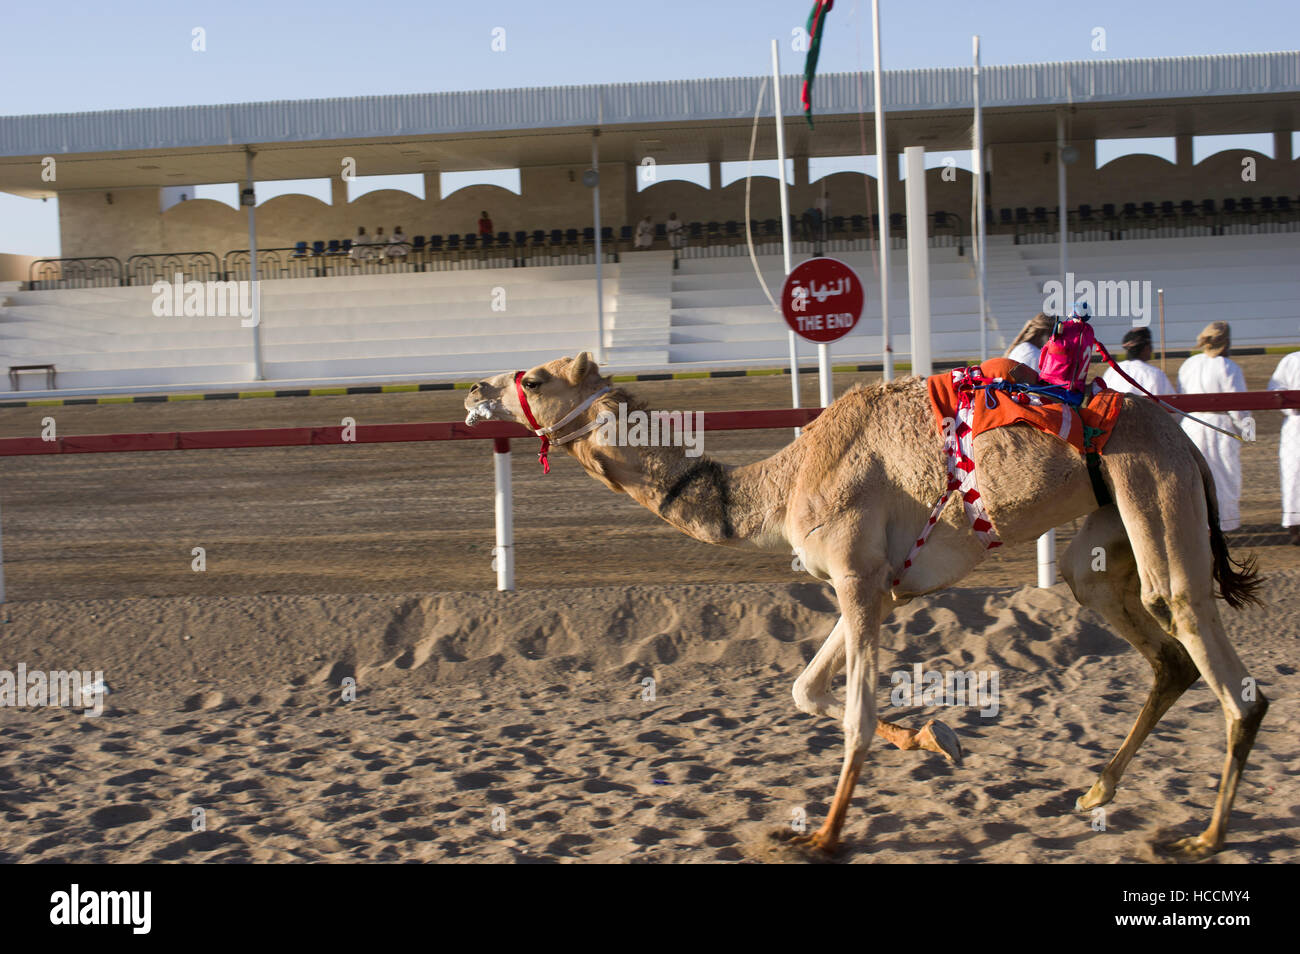 Camel with a robot jockey in the saddle approaching the finish line in a camel race in Oman. Mouth frothy with exertion Stock Photo